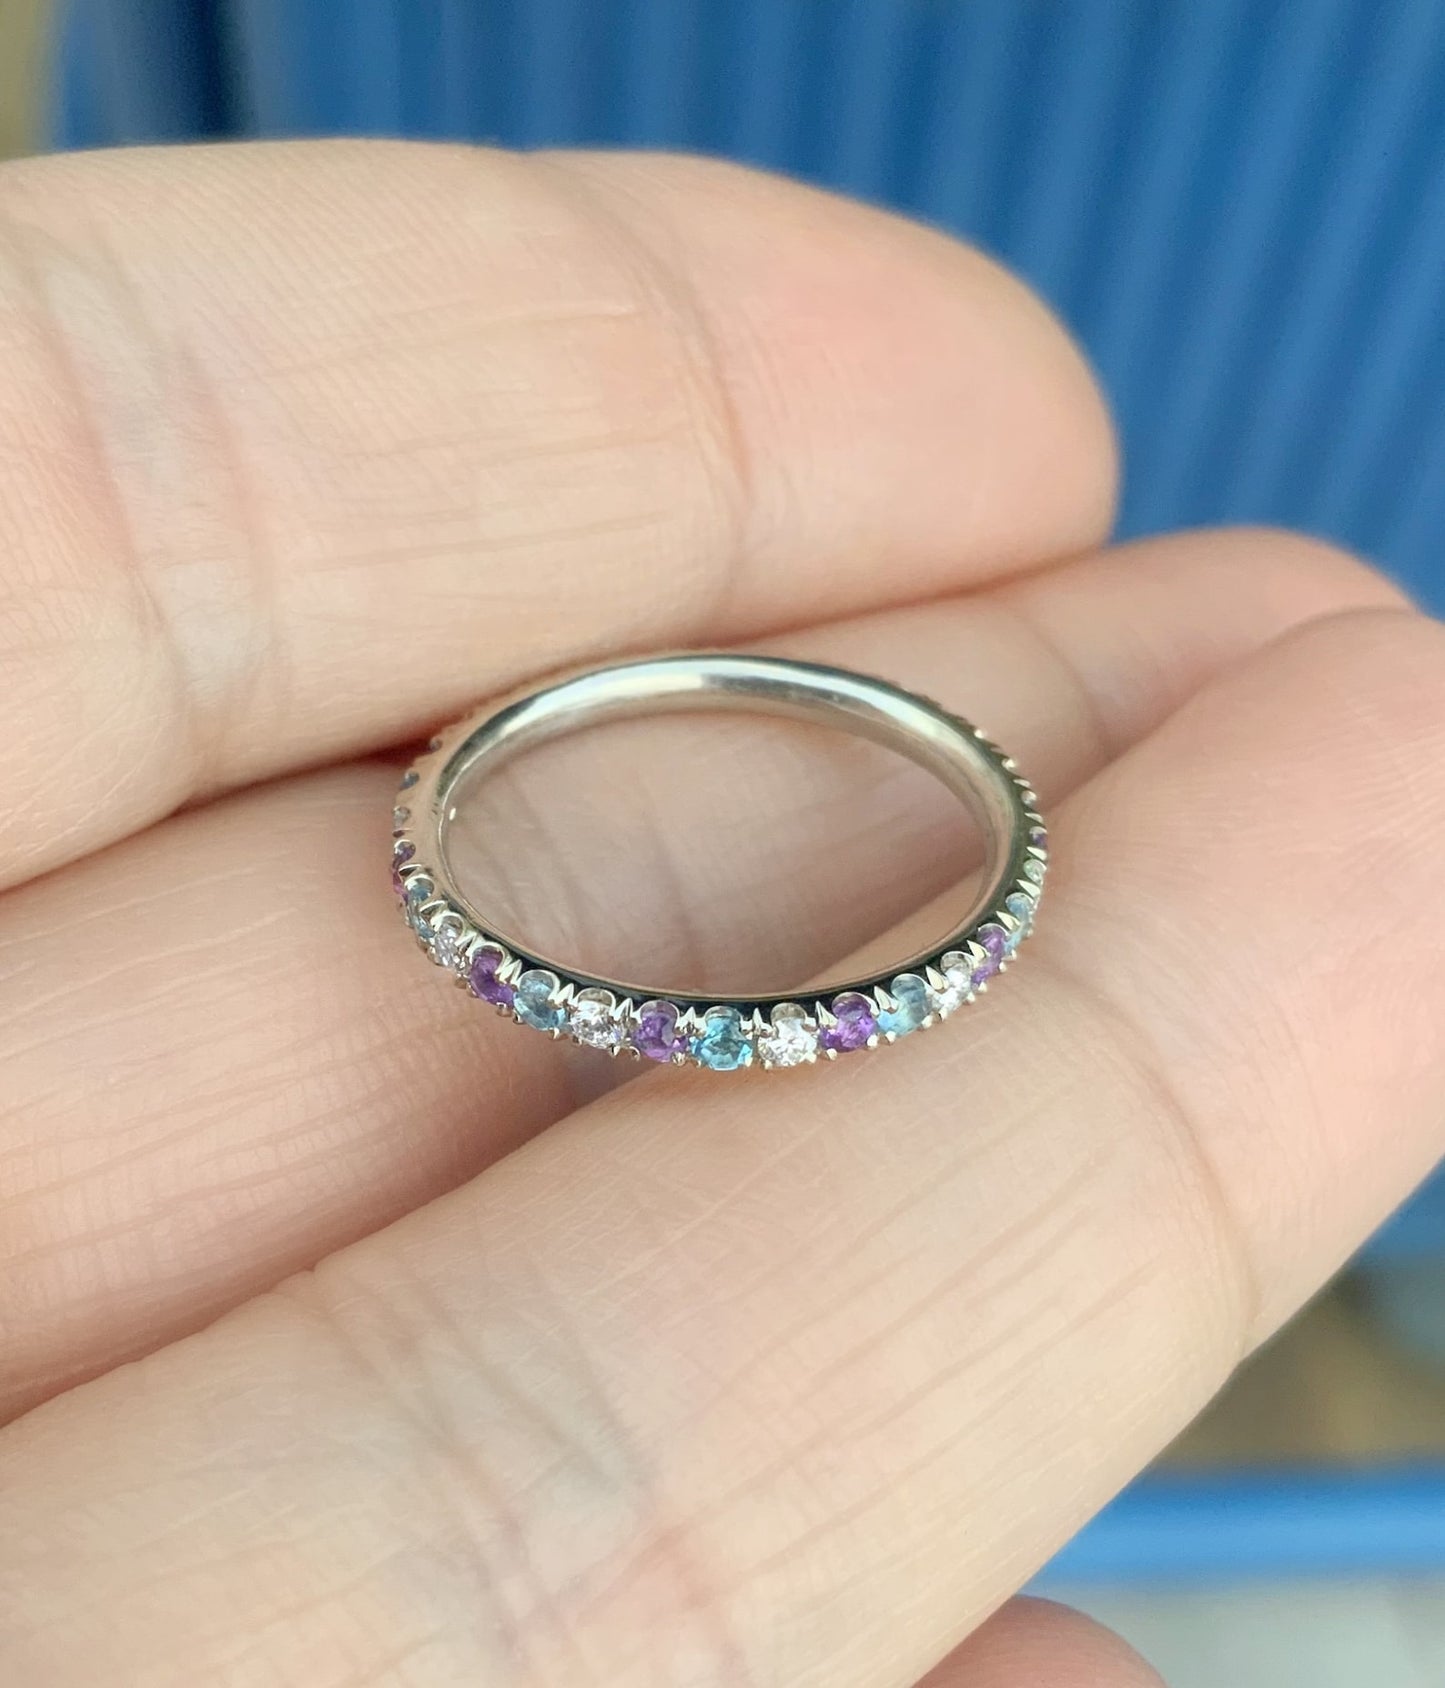 2mm Diamond, Amethyst, and Topaz Pave Eternity Ring